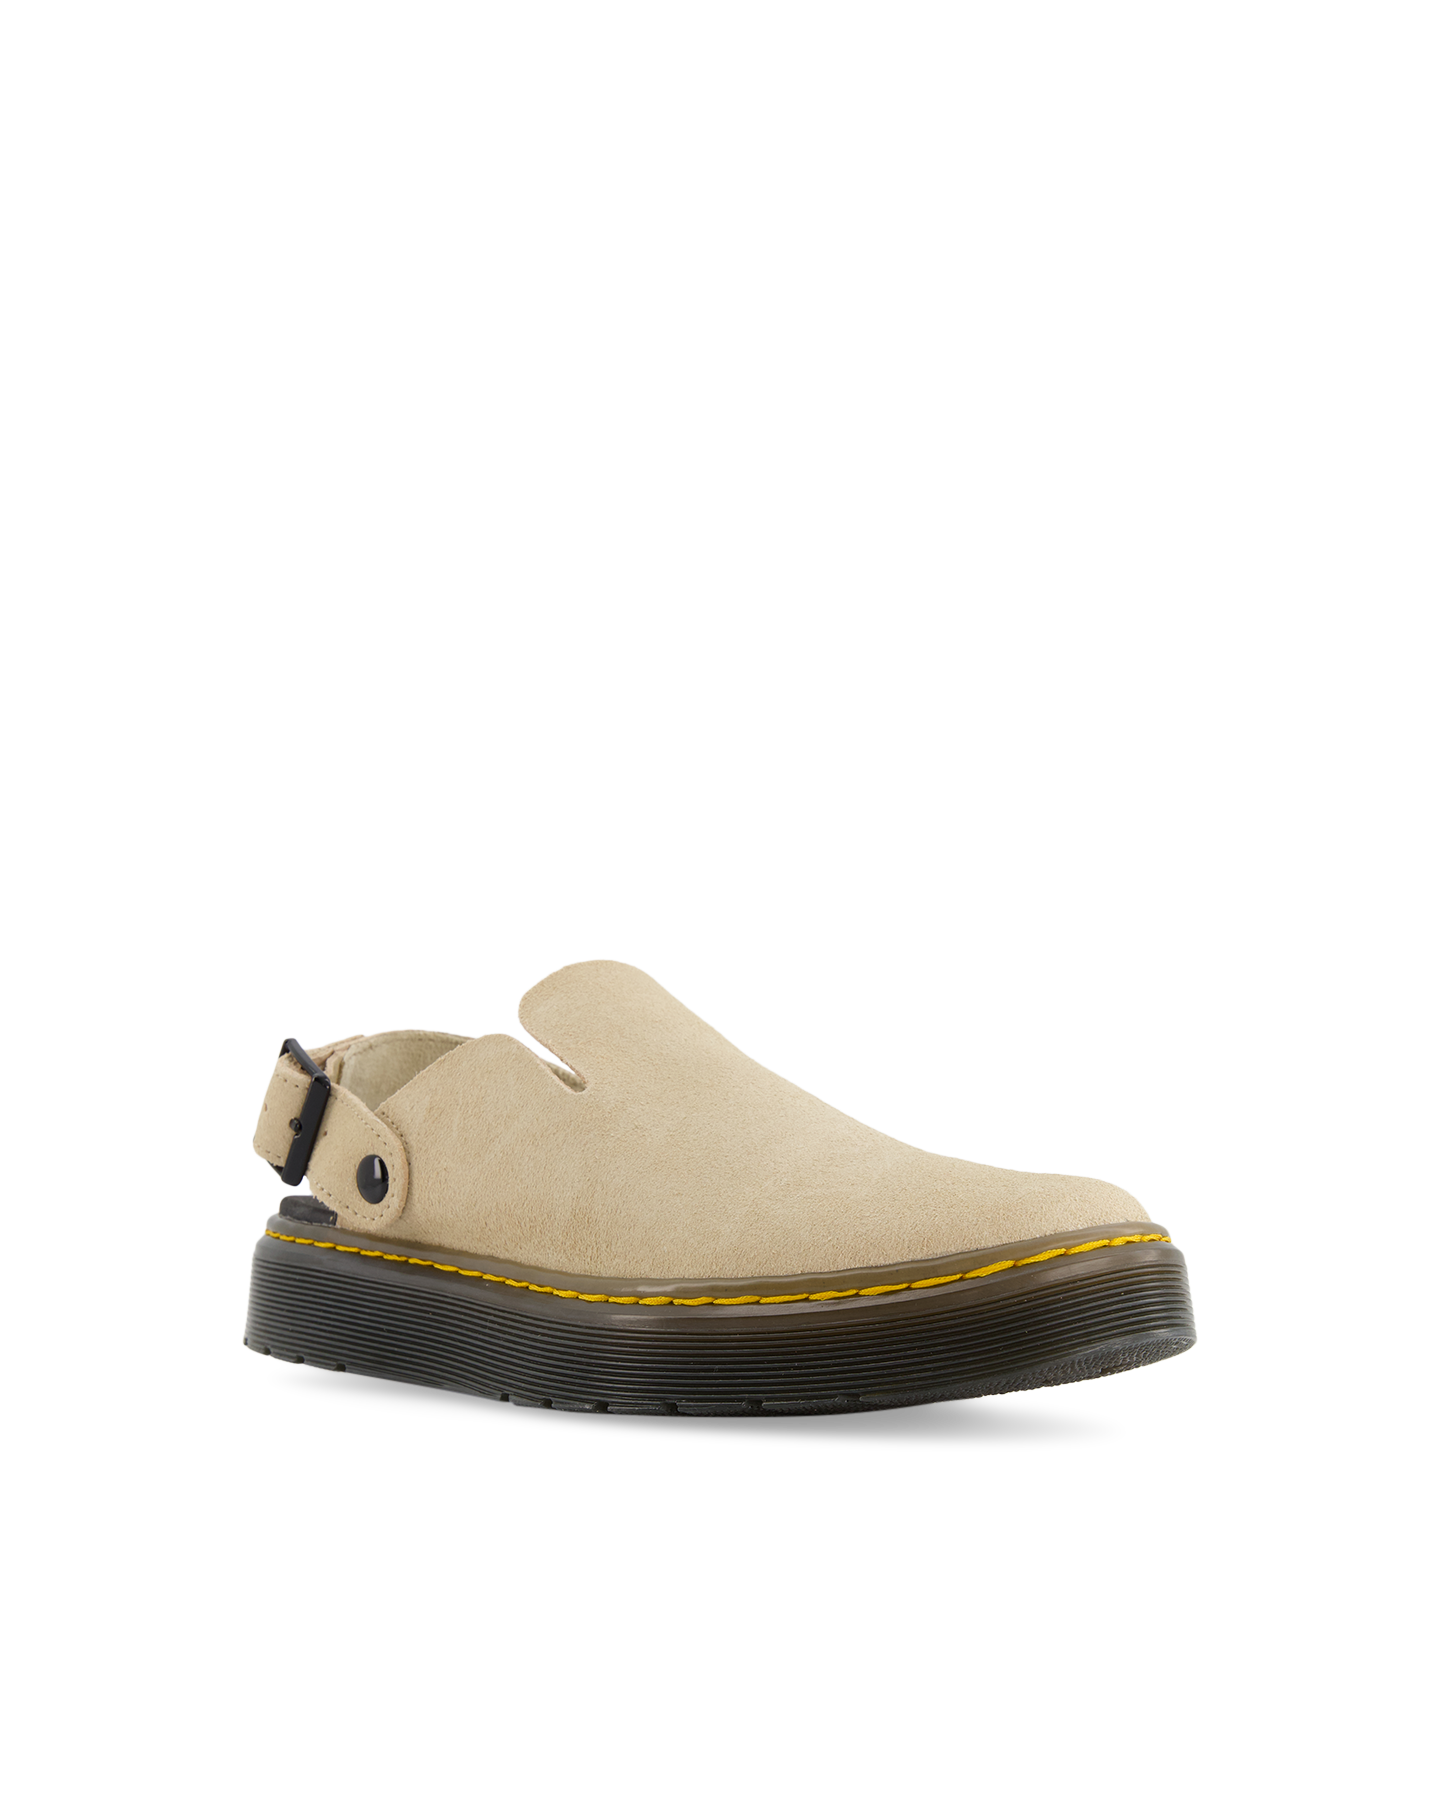 Dr Martens Carlson Warm Sand E H Suede Mb GEEL 2